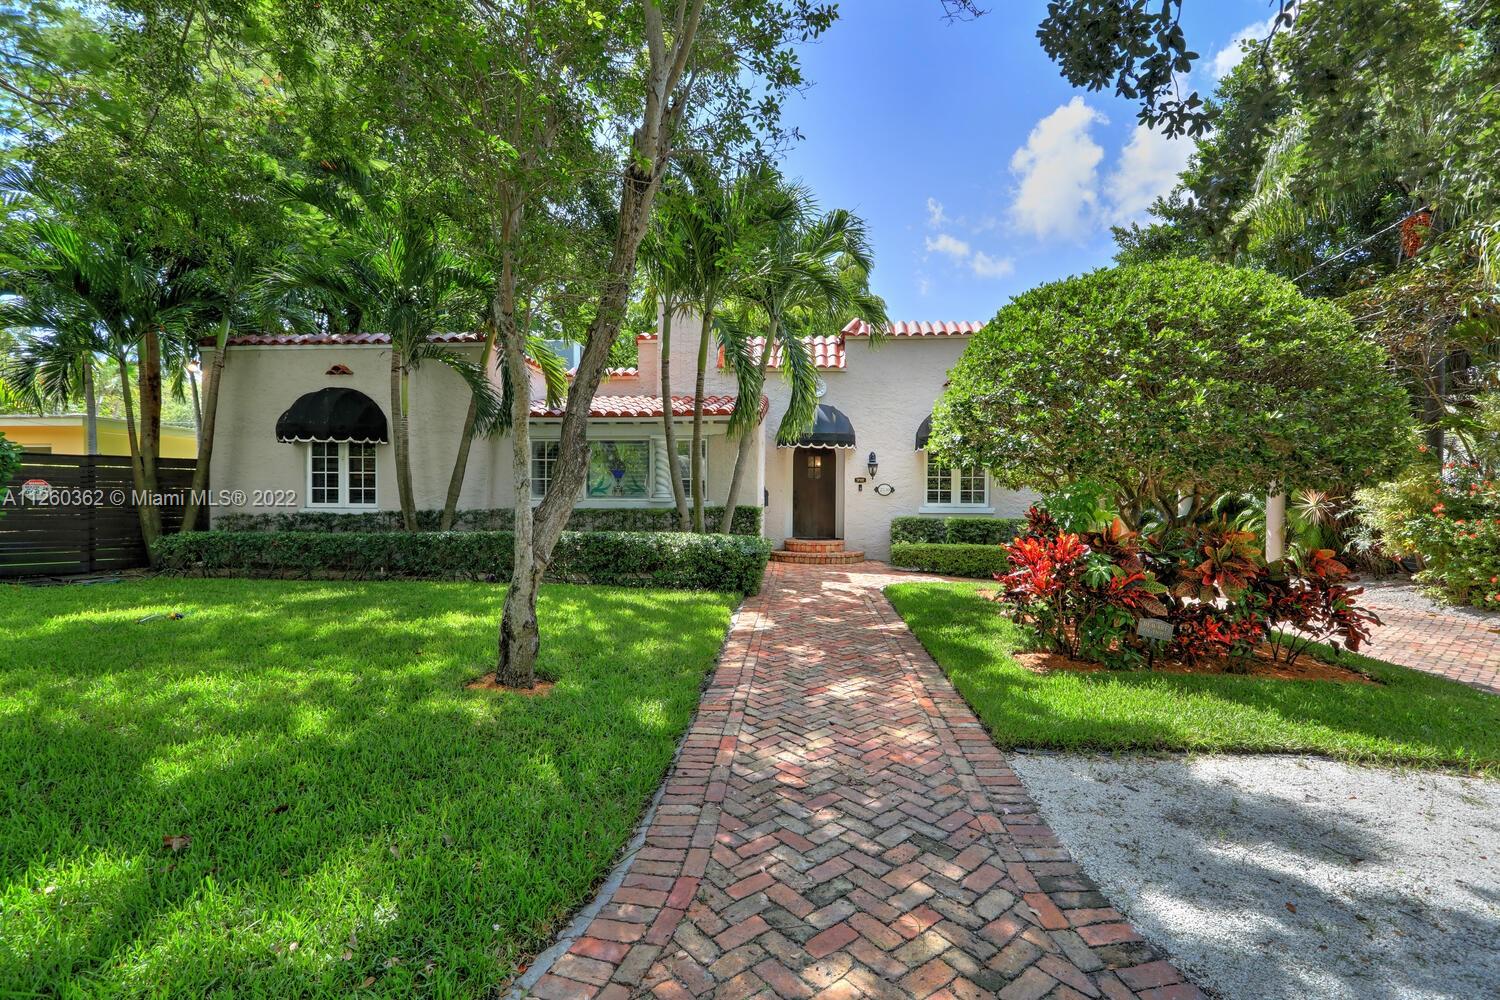 Lovely home on a quiet tree-lined street in prestigious North Coconut Grove. Walk or bike to bayfront parks & marinas and to the Grove village center’s galleries, boutiques and sidewalk cafes.  Floorplan includes formal living w/fireplace & family room w/stunning wood-beamed ceiling & glass wall overlooking the garden. Wood & stone flooring + impact windows throughout. Sleek, european-style kitchen features wood cabinetry & top-of-the-line appliances. Master bedroom has an oversized walk-in closet with built-in cabinetry. 4BR/2.5BA includes connected “guest suite” w/ separate entrance. Private & tranquil outdoor living spaces feature wood deck and lush tropical landscaping. Room to add a pool. Just minutes to downtown, MIA, Key Biscayne & the Beaches